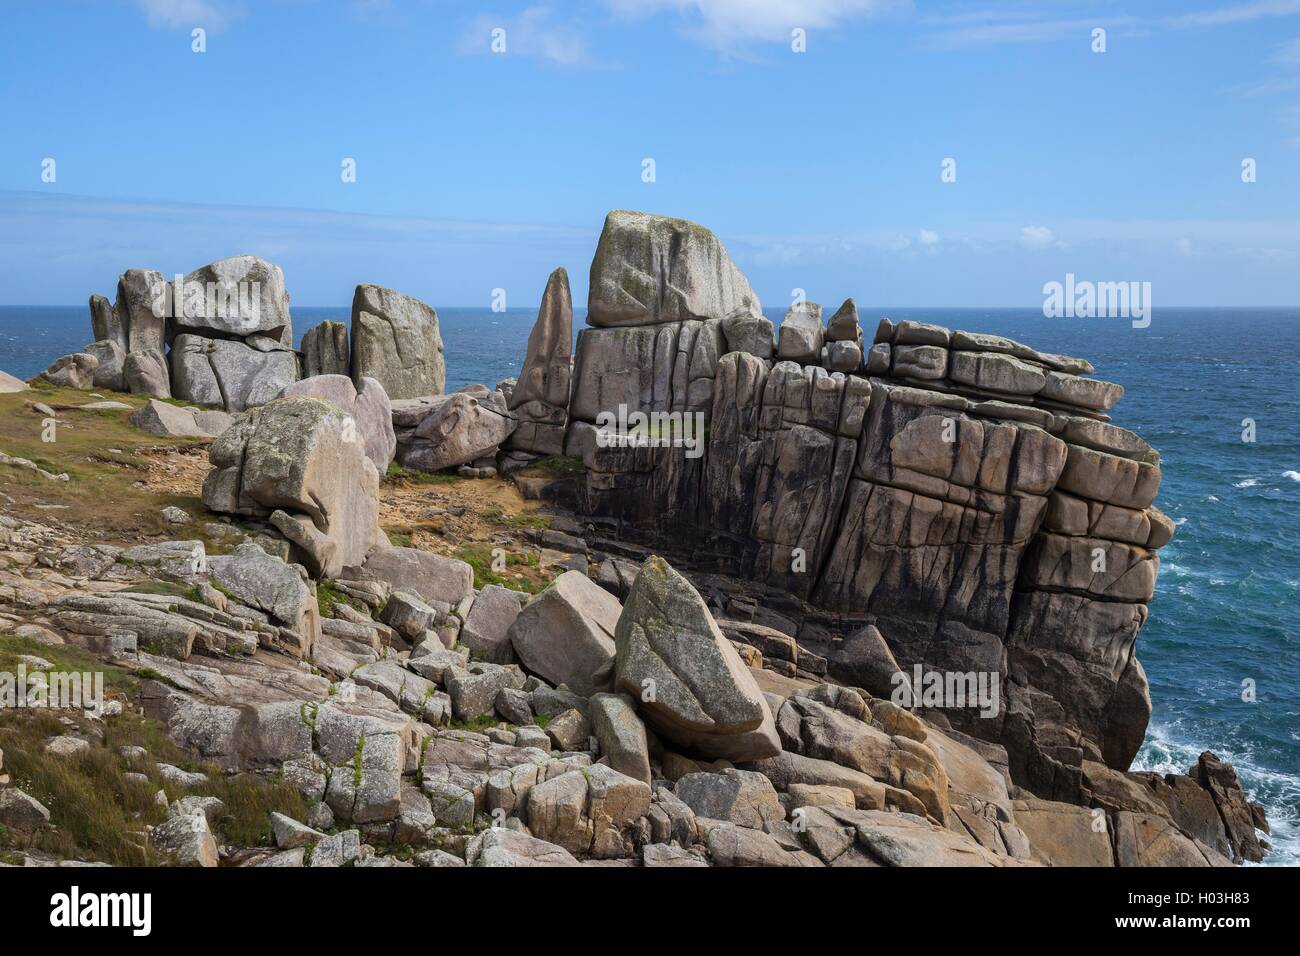 Unusual rock formations, Peninnis Head, St Mary's, Isles of Scilly, England. Stock Photo